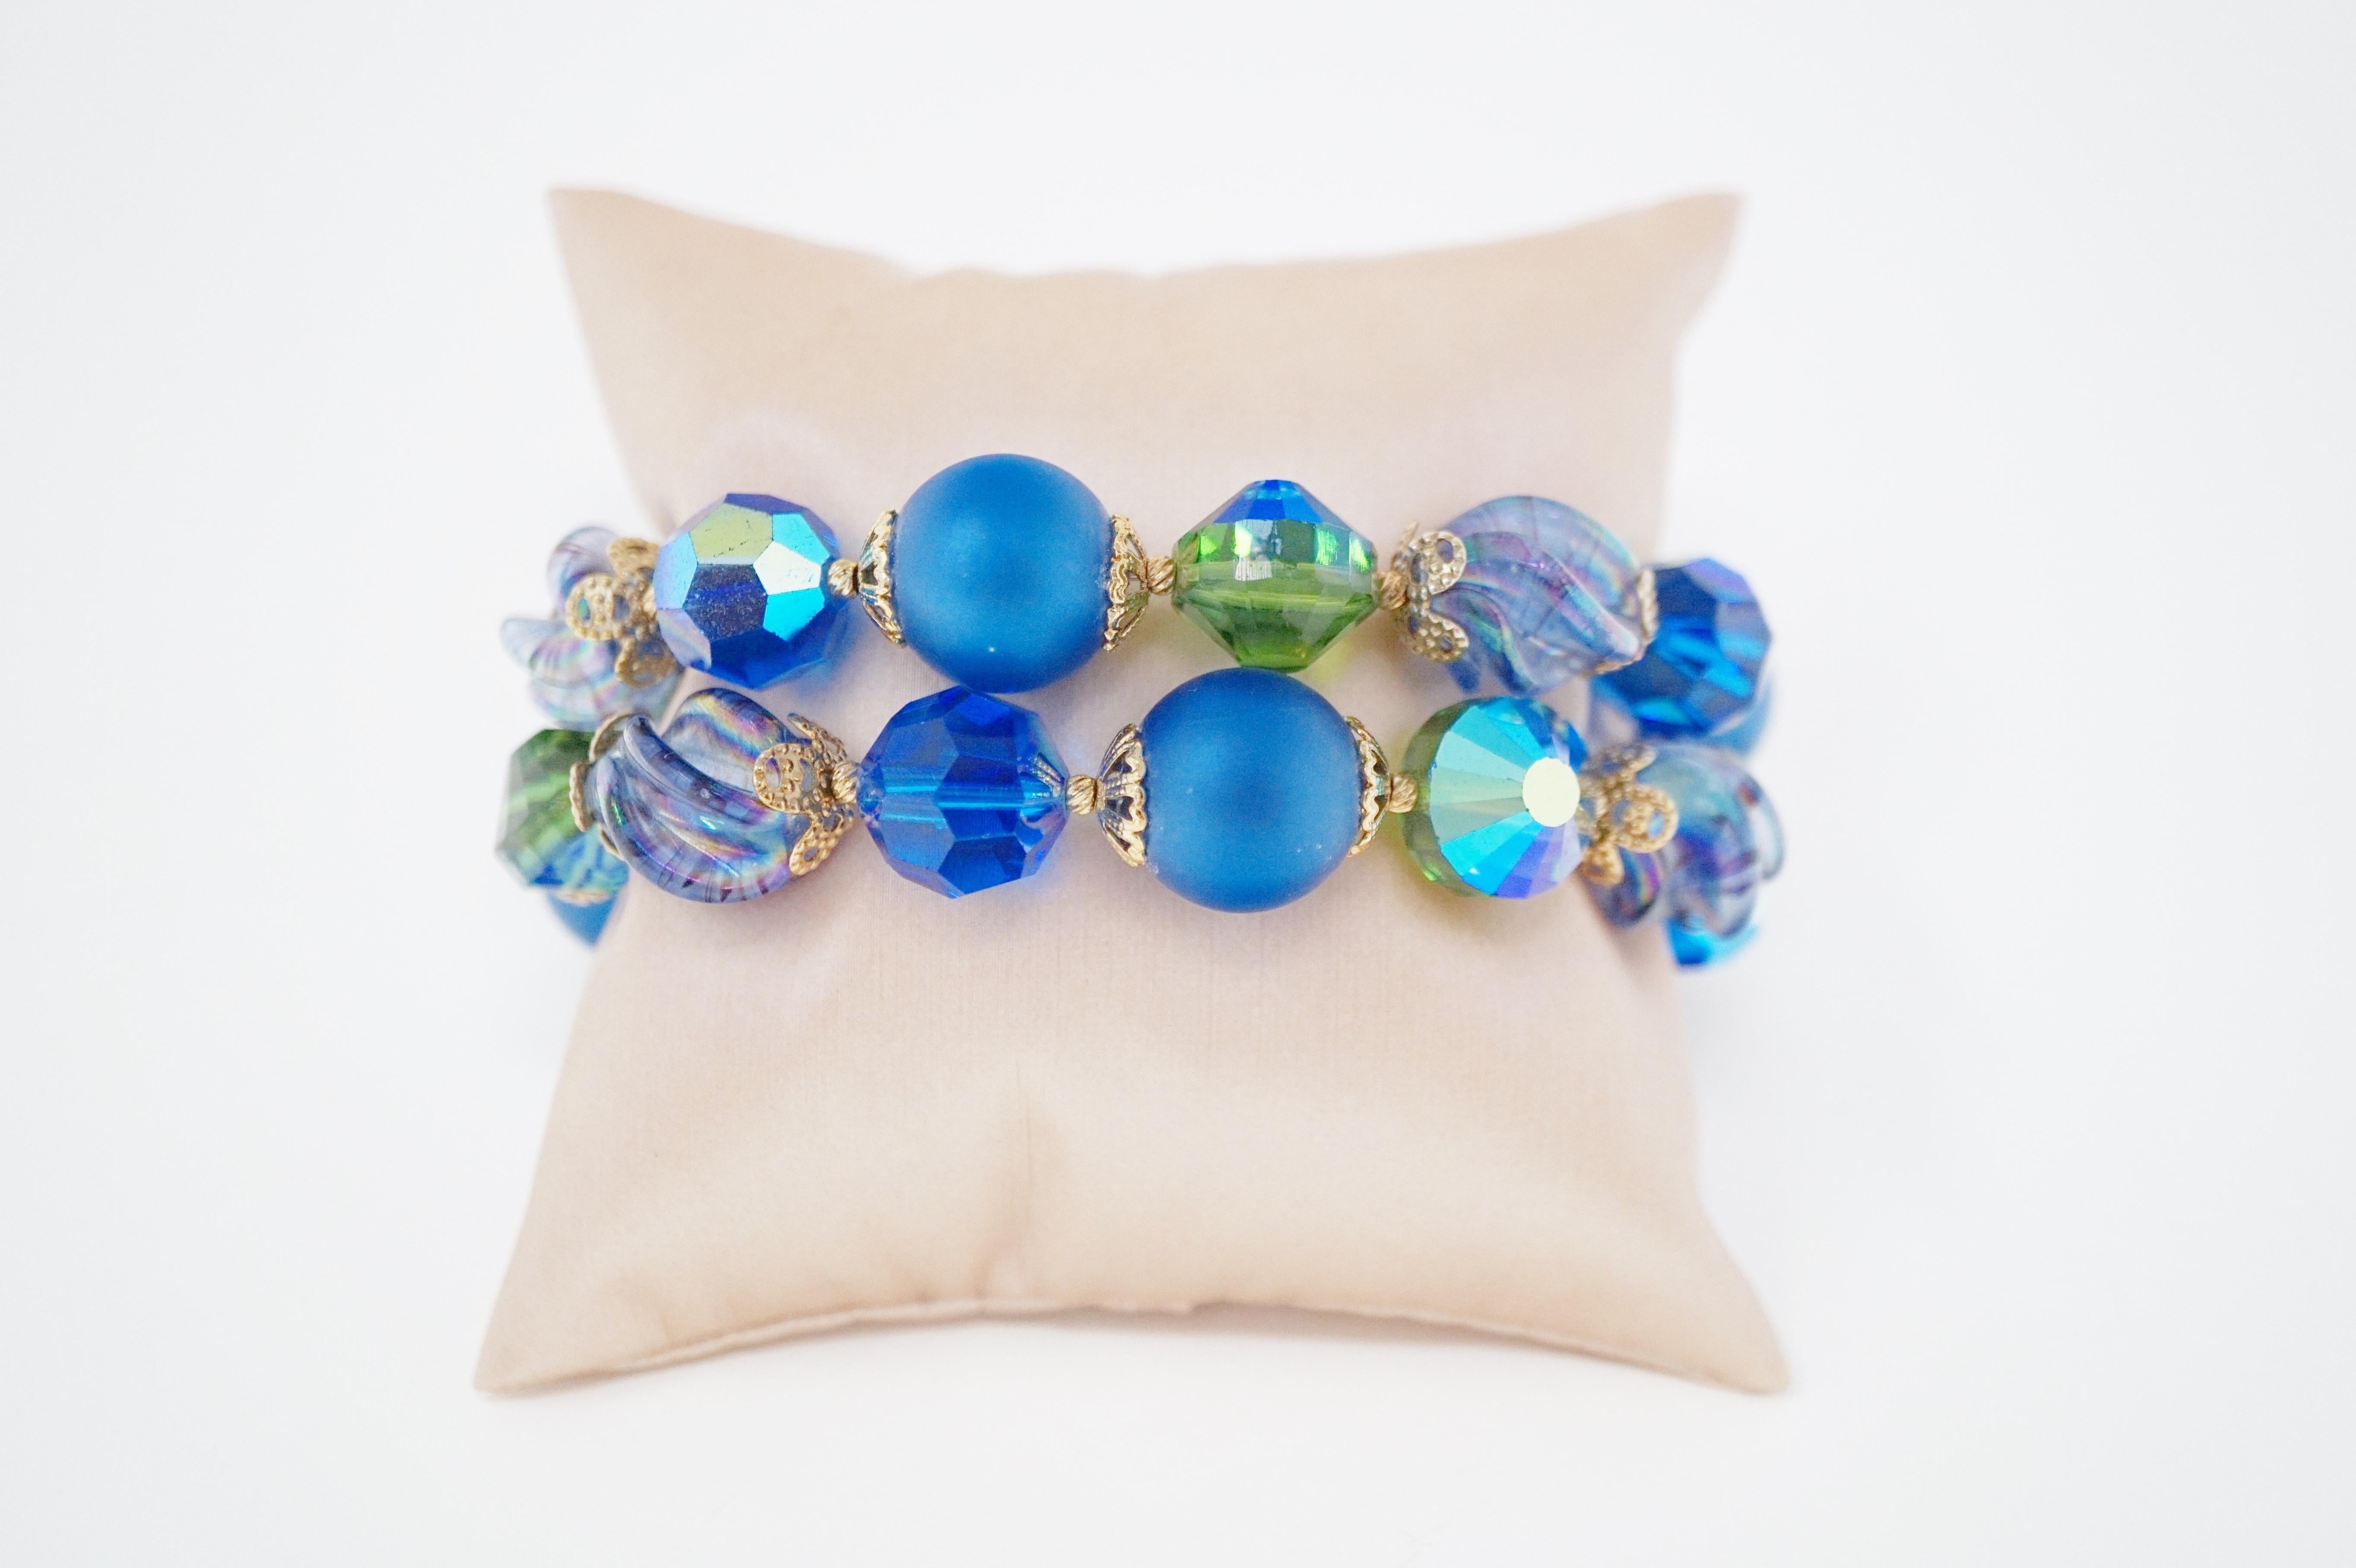 Women's Vendome Beaded Bracelet with Aurora Borealis Crystals, circa 1950, Signed For Sale